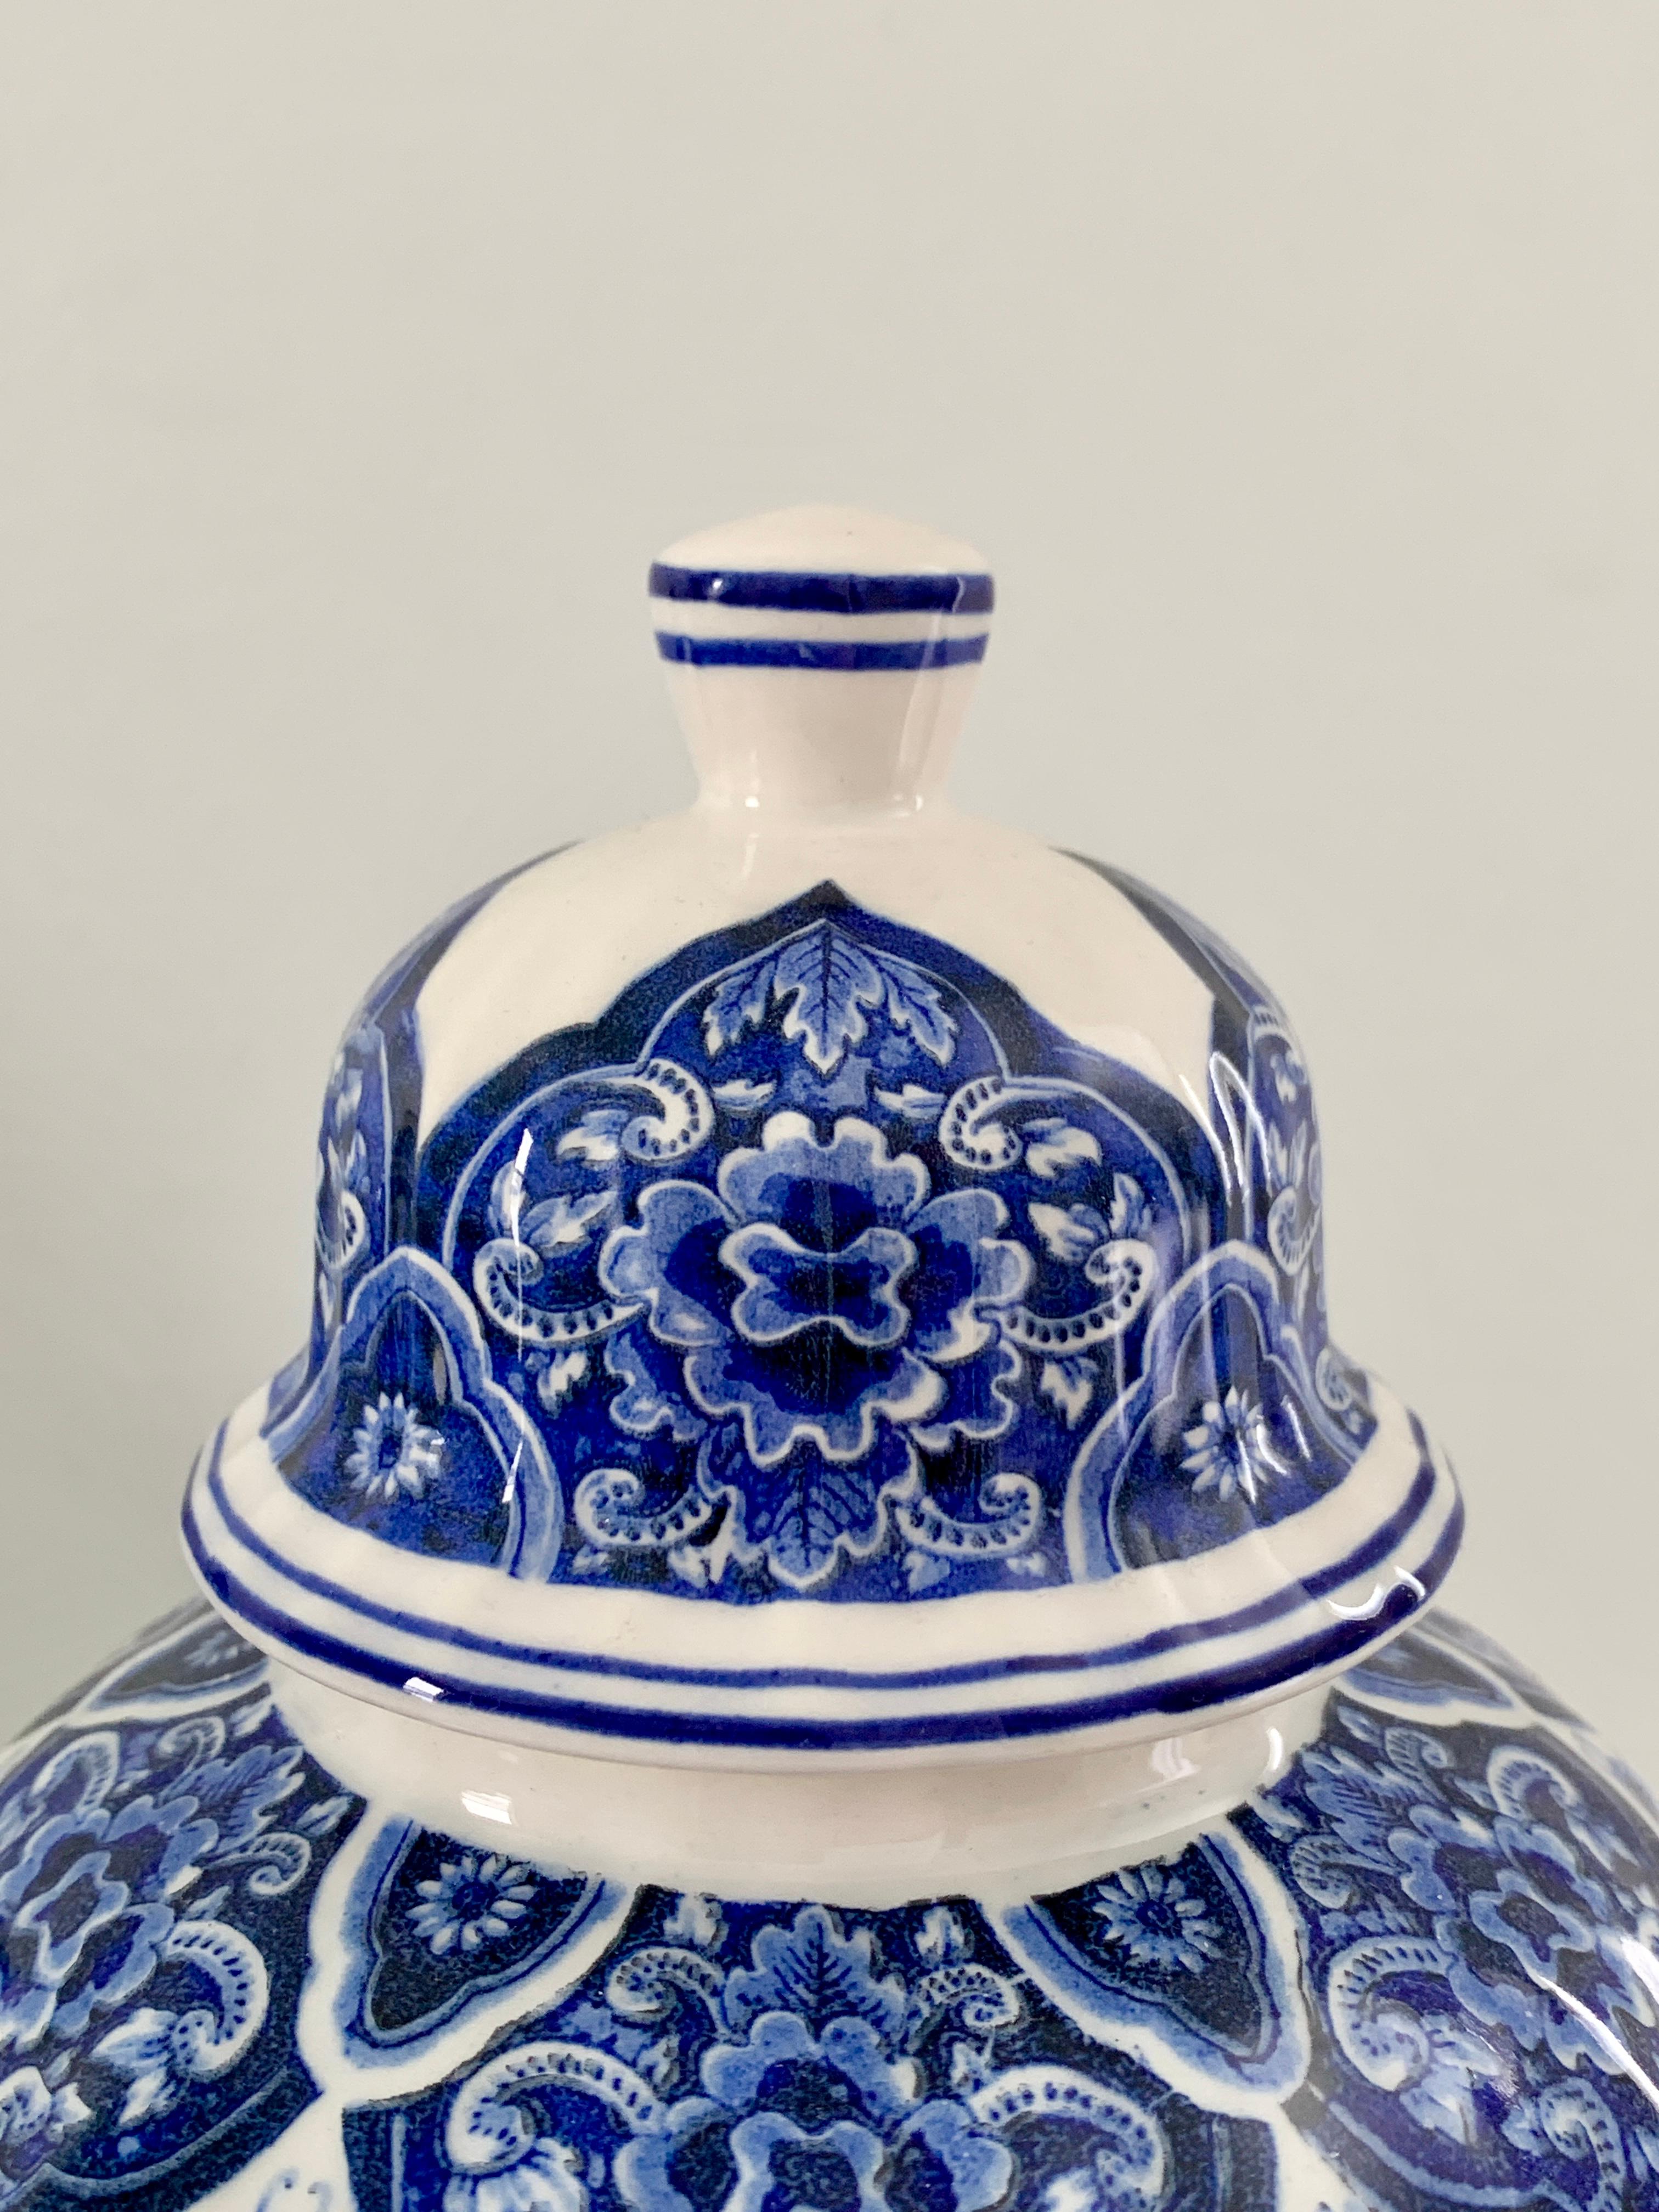 Chinoiserie Italian Blue and White Porcelain Ginger Jars by Ardalt Blue Delfia, Pair